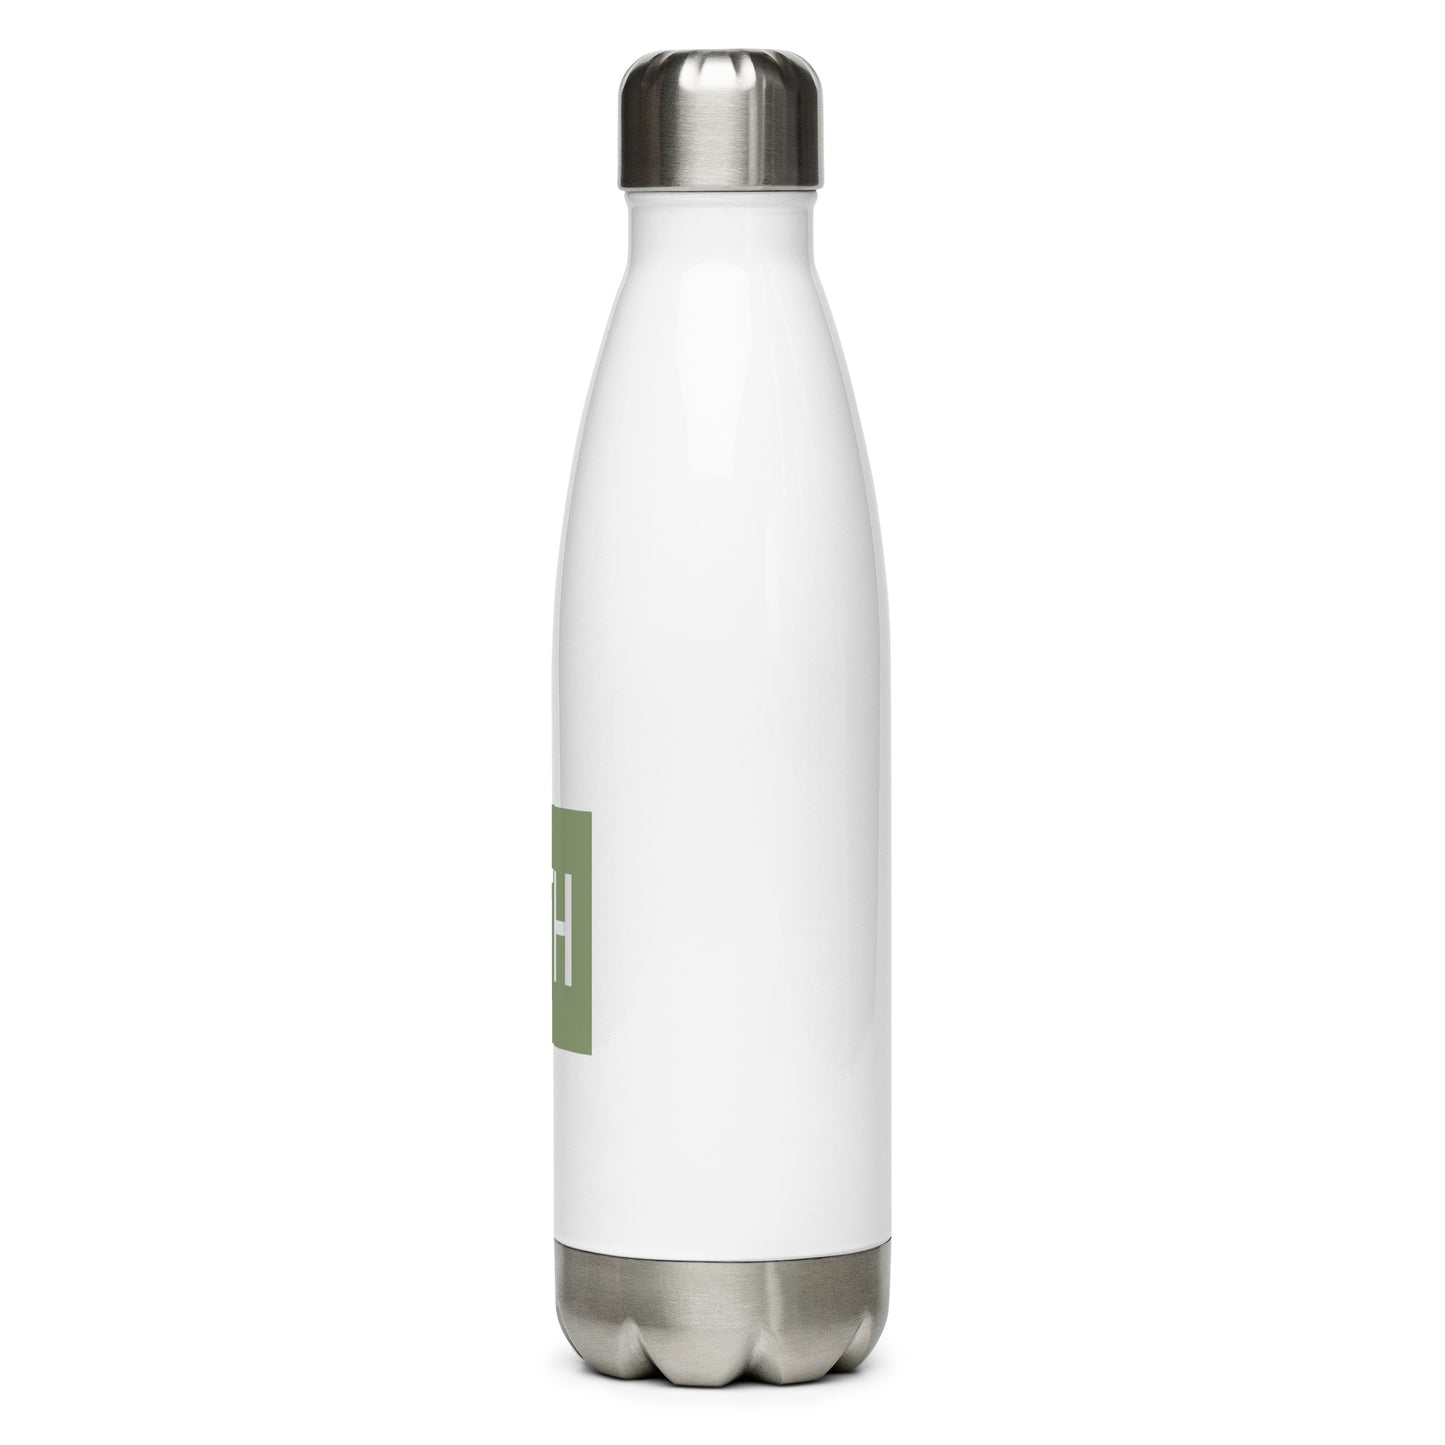 Aviation Gift Water Bottle - Camo Green • ATH Athens • YHM Designs - Image 08